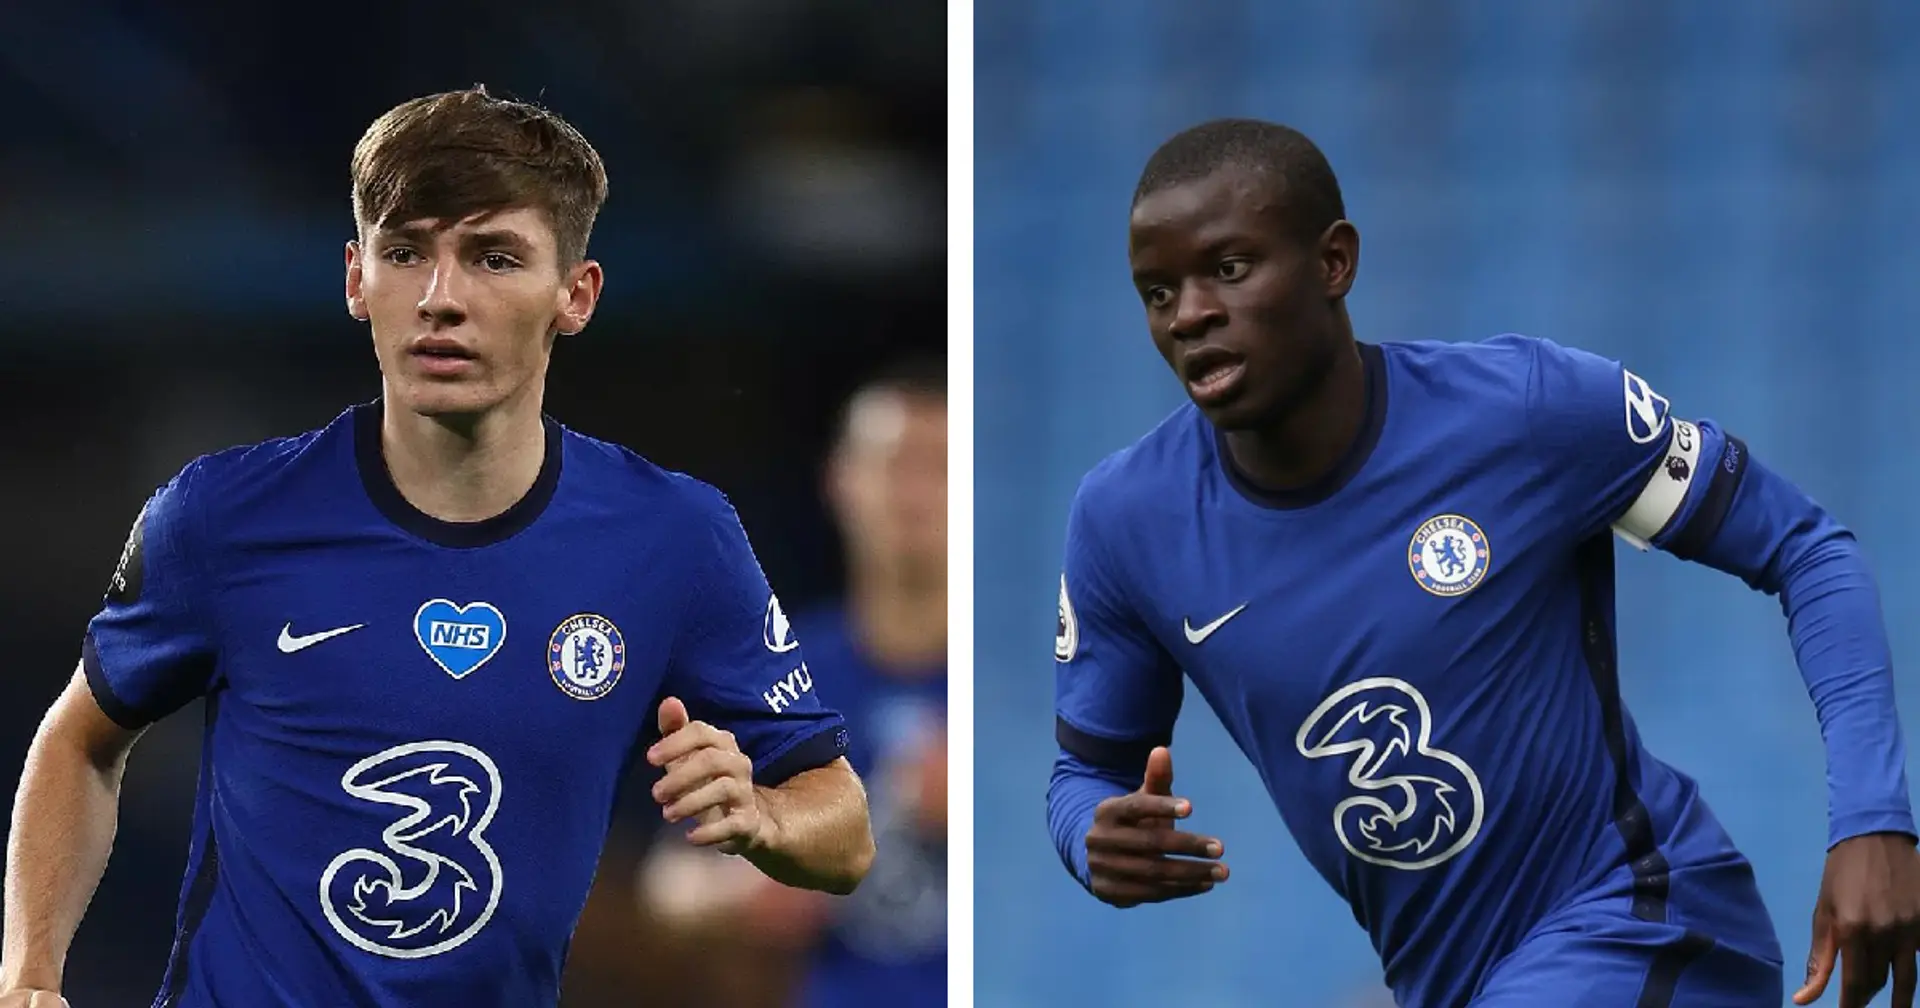 N'Golo Kante opens up on his relationship with Billy Gilmour